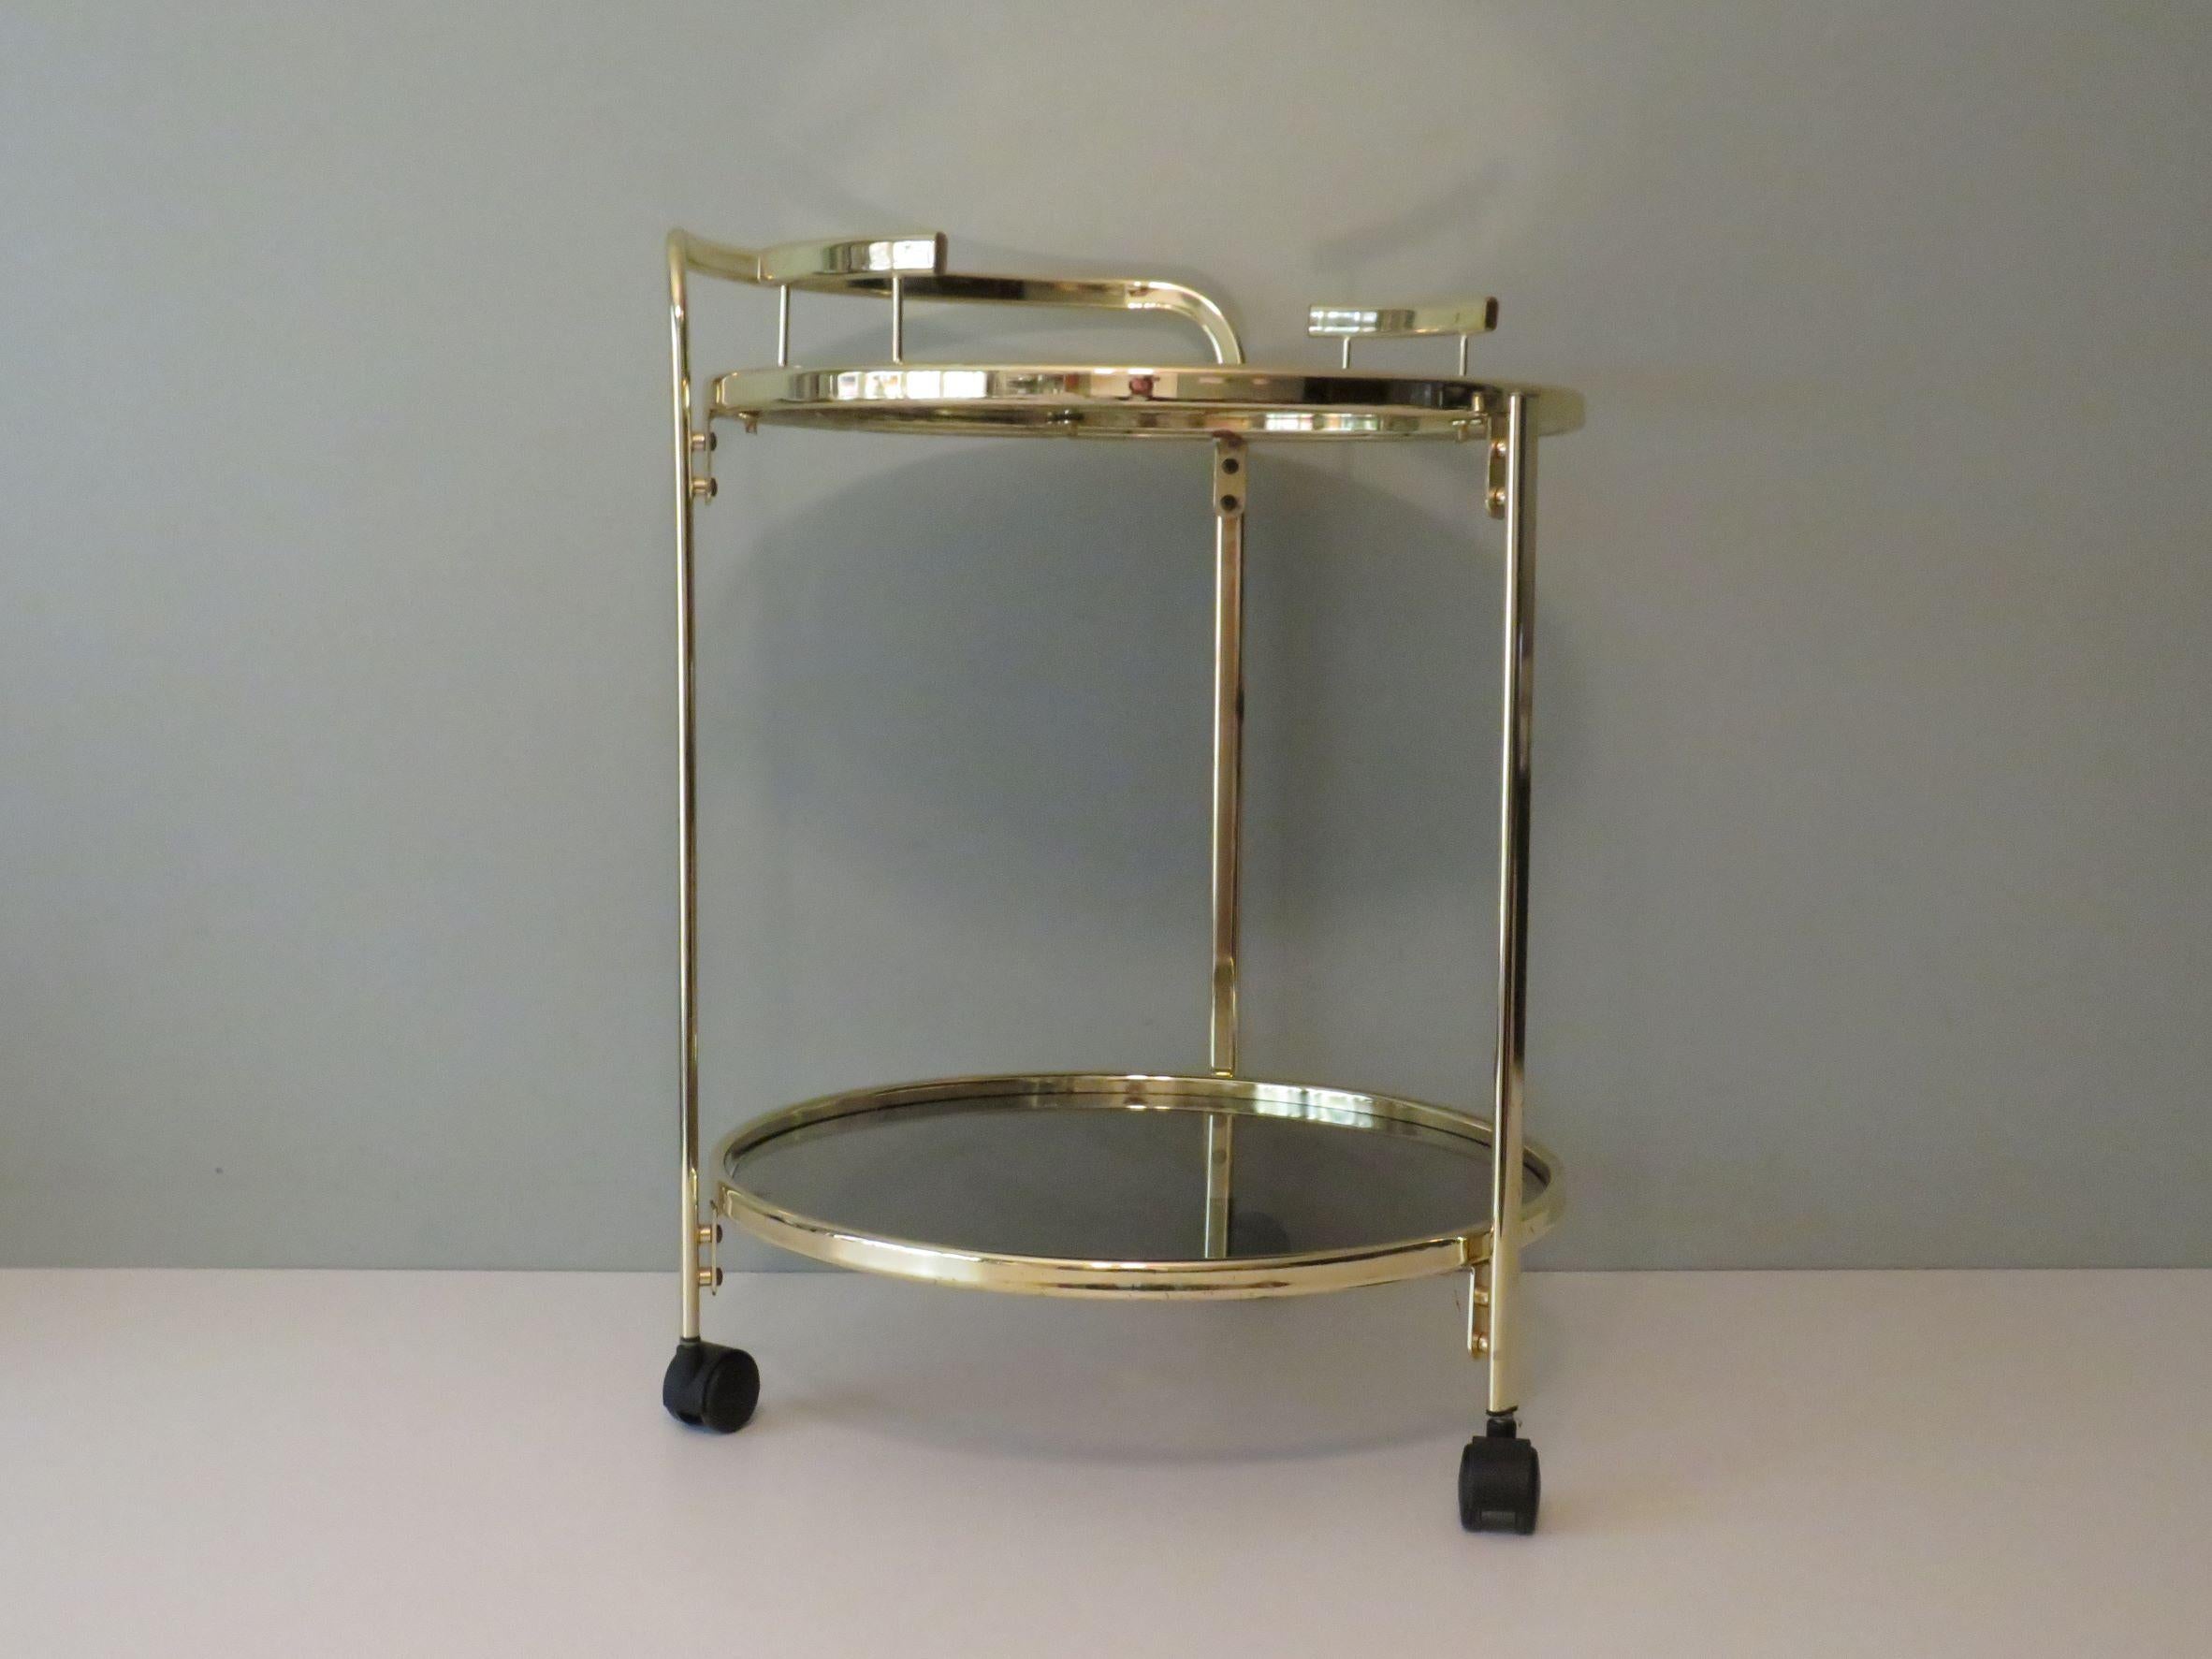 Round gold-plated metal serving trolley with wheels and removable tray.
The smoked glass top at the bottom is at a height of 14 cm and
the removable tray with mirror glass is located at 56 high and has 2 handles.
The height of the serving trolley